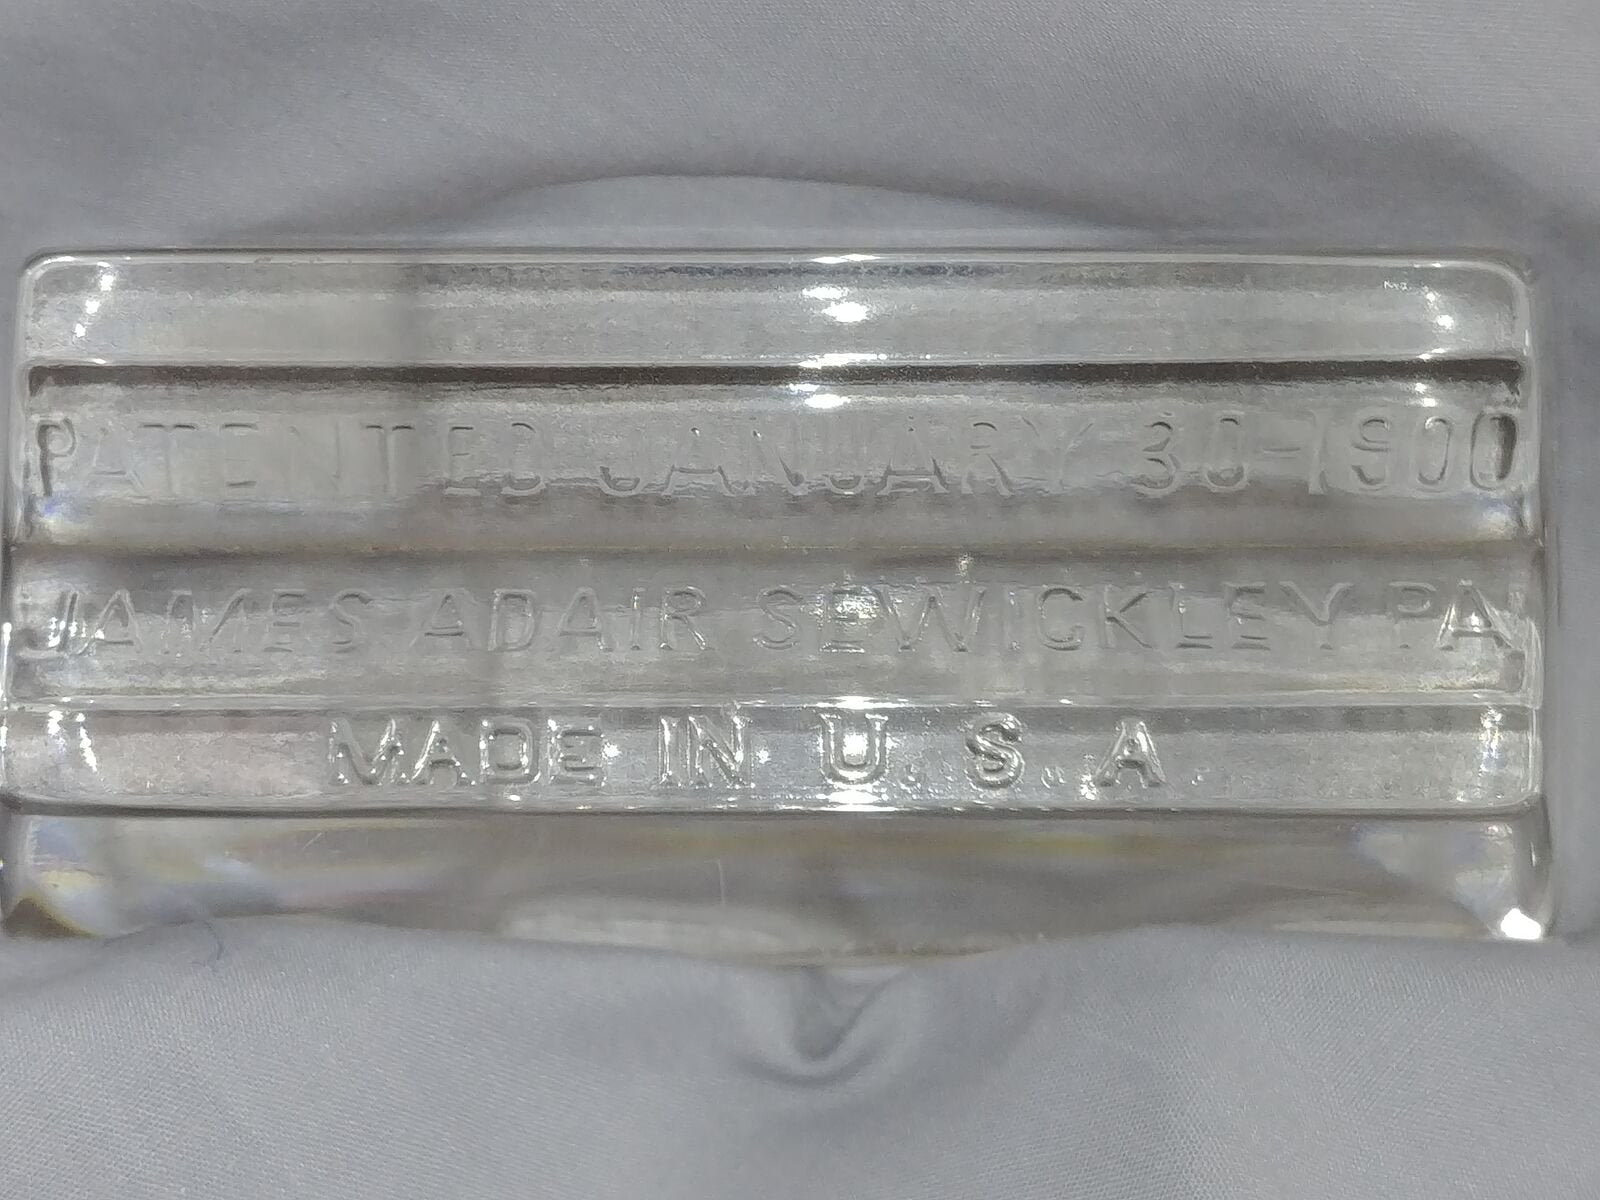 Vintage Glass Paperweight Embossed with James Adair Sewickley PA 1900